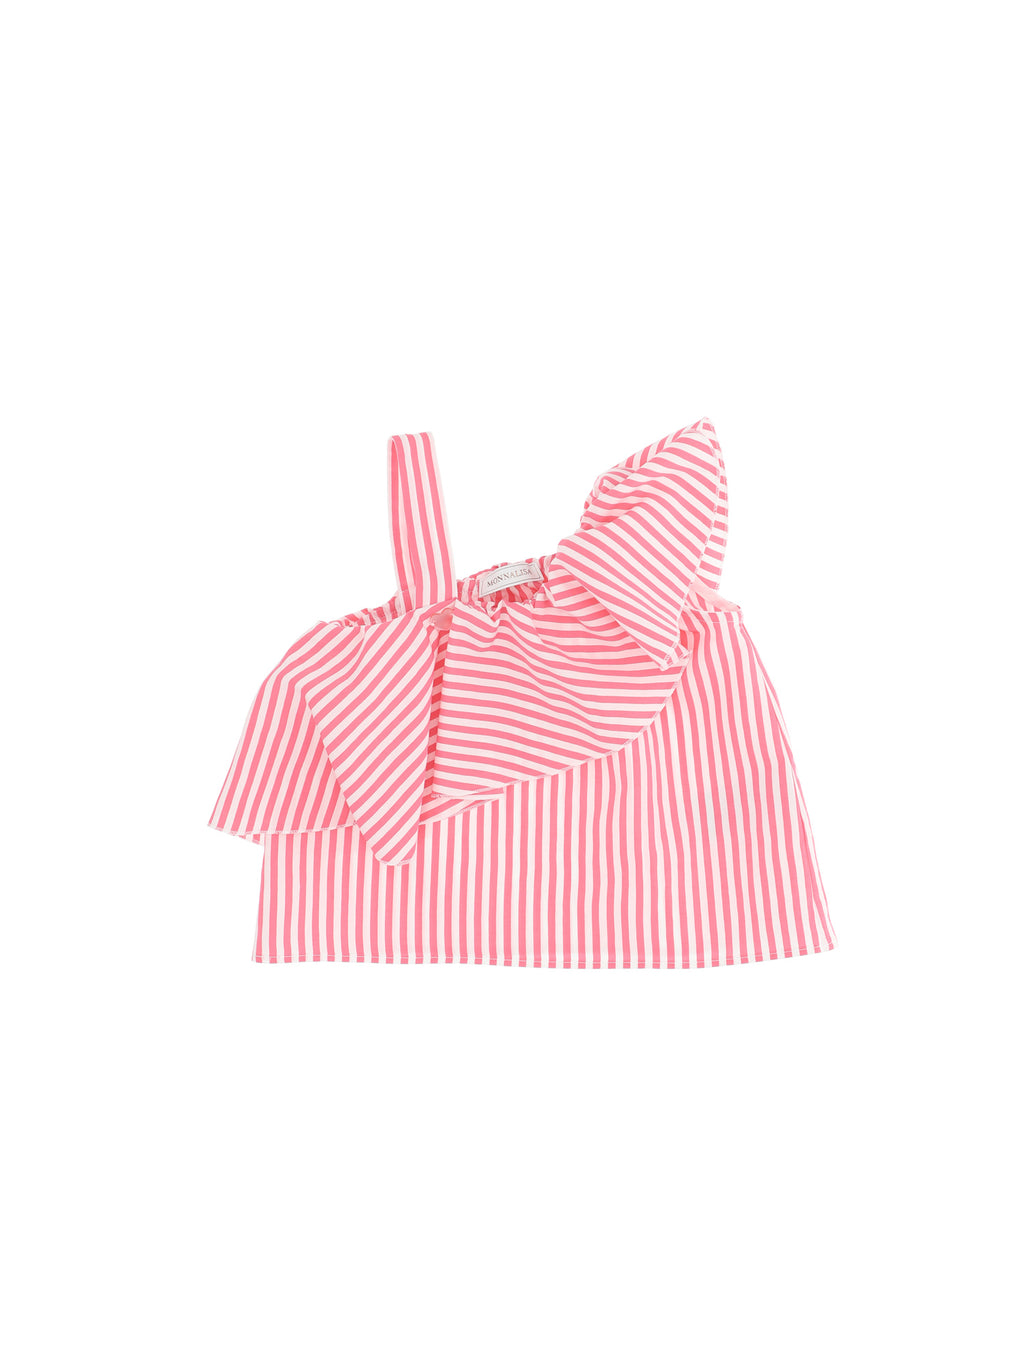 Red and White striped Asymetric Top